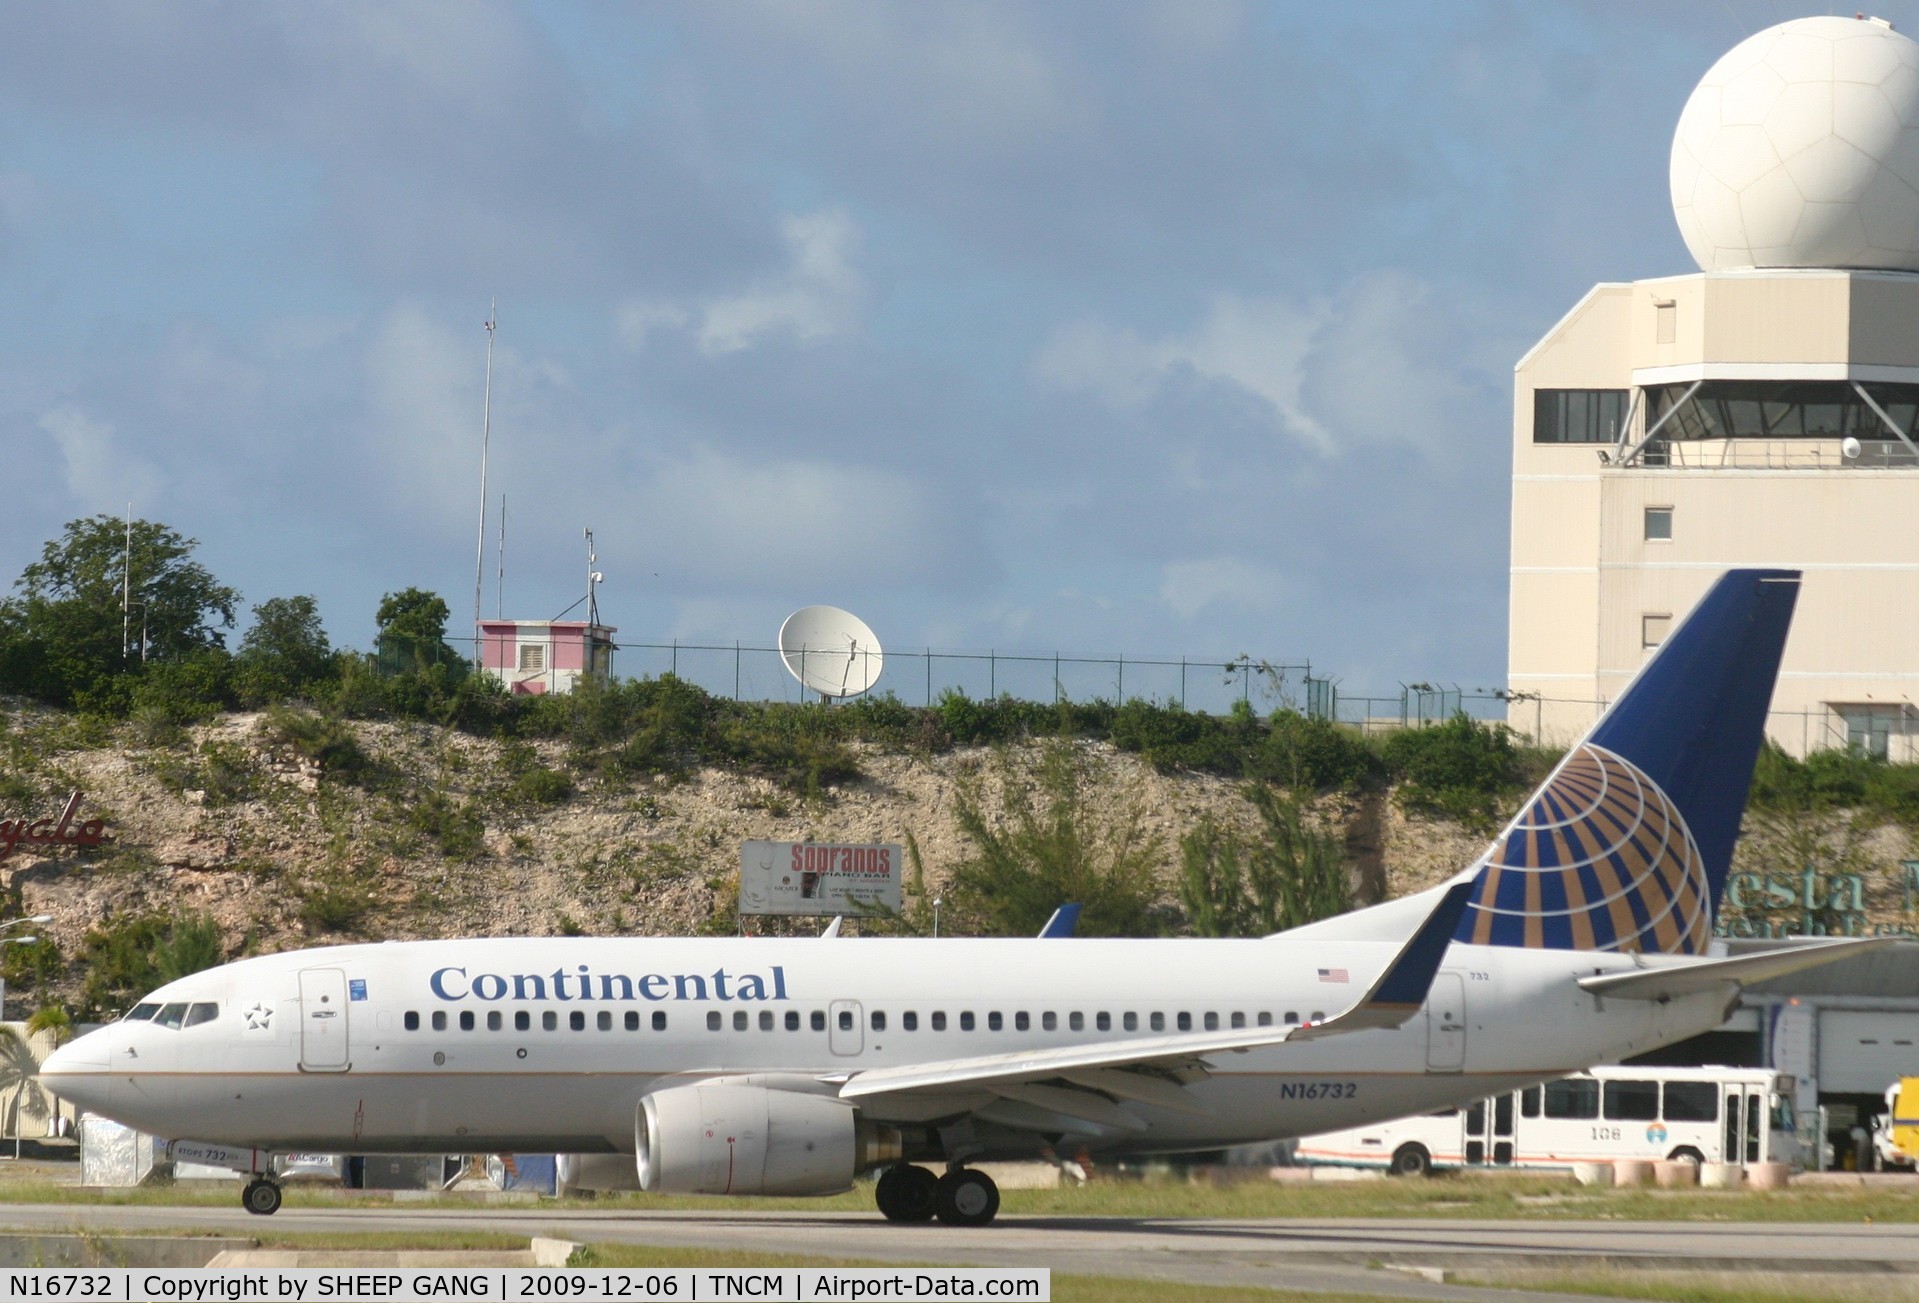 N16732, 1999 Boeing 737-724 C/N 28948, Continental taxing to A